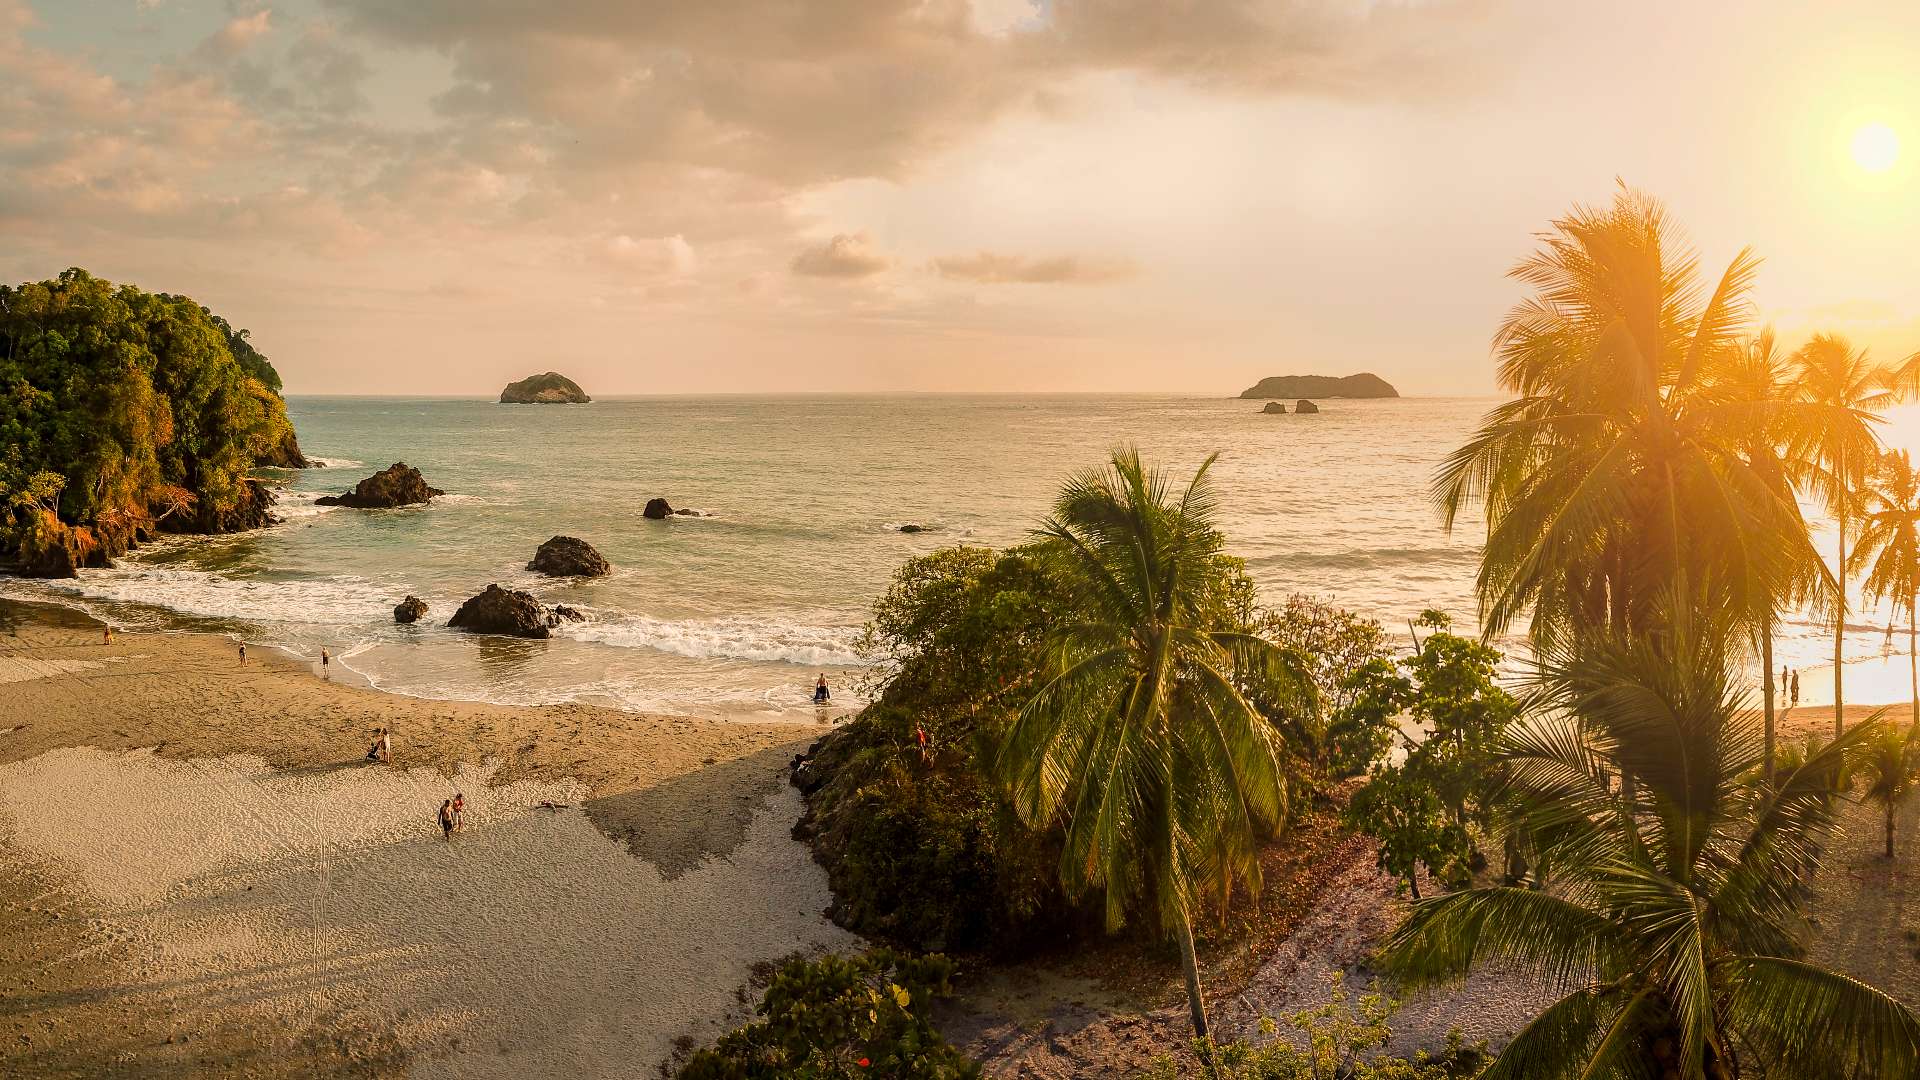 Costa Rica's 10 Most Popular Places - Wanderingports